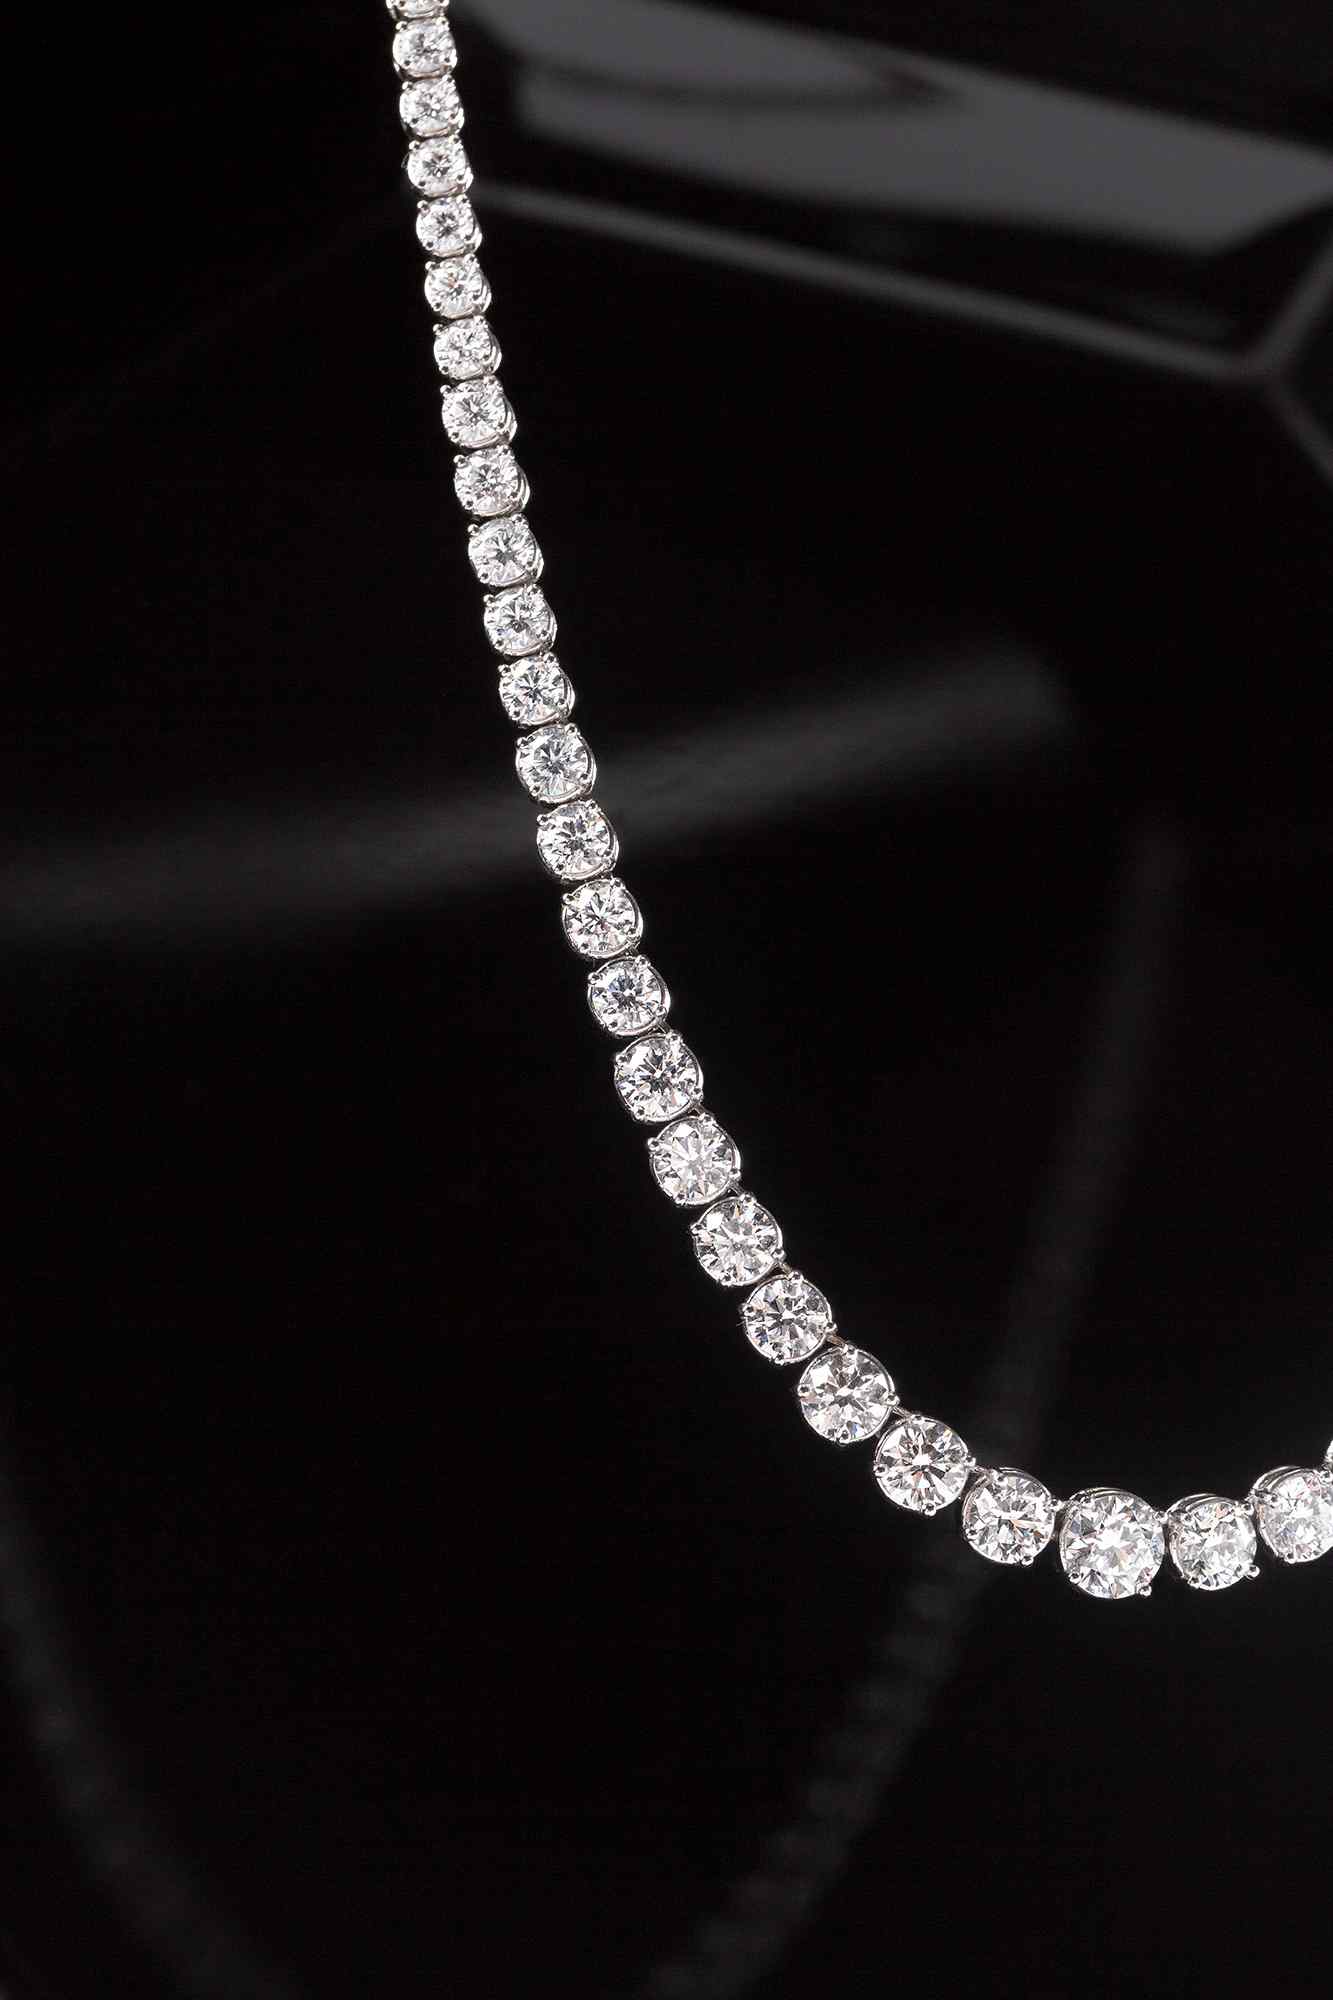 The Collier Rivière Necklace features graduated diamonds - a crescendo towards the main (and largest) diamond that sits at the center of this necklace. 